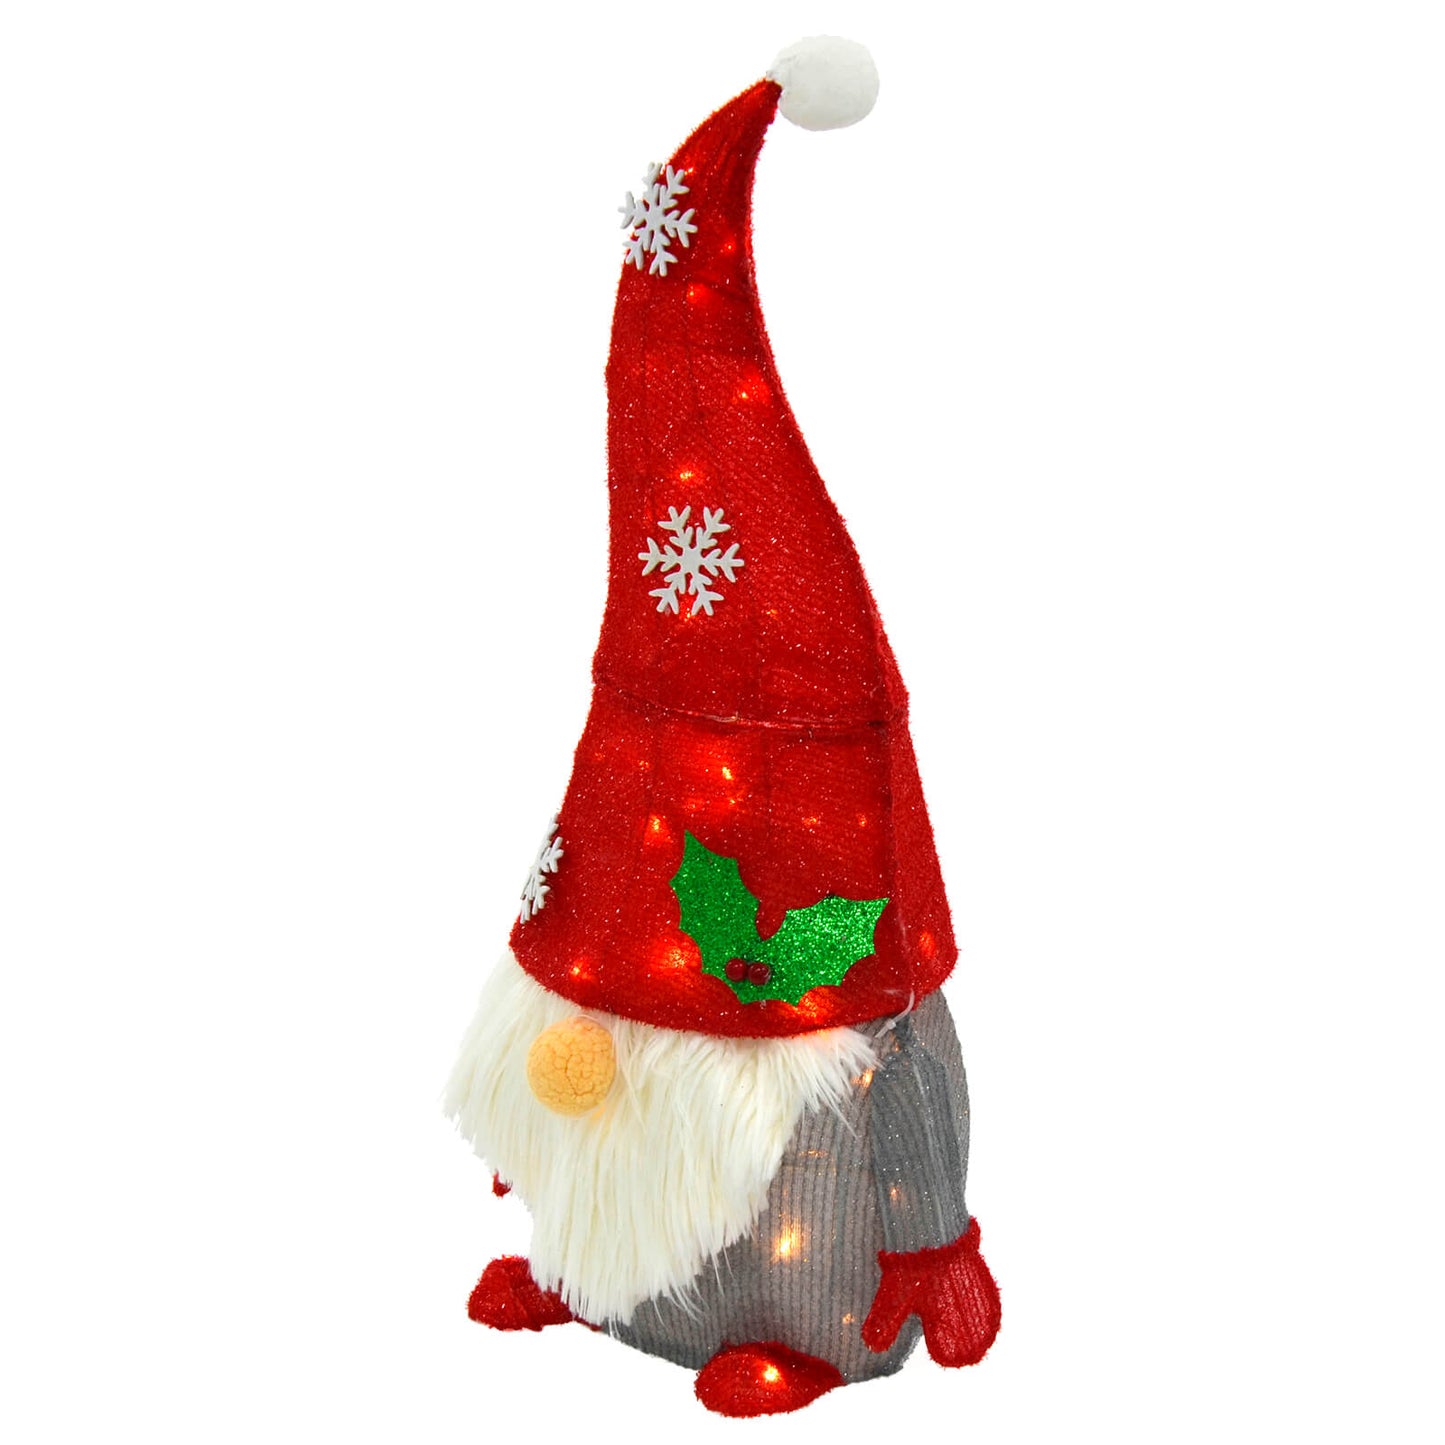 Side view of Light up Christmas Gonk decoration with warm white LED lights, red glitter fabric hat with holly and snowflakes